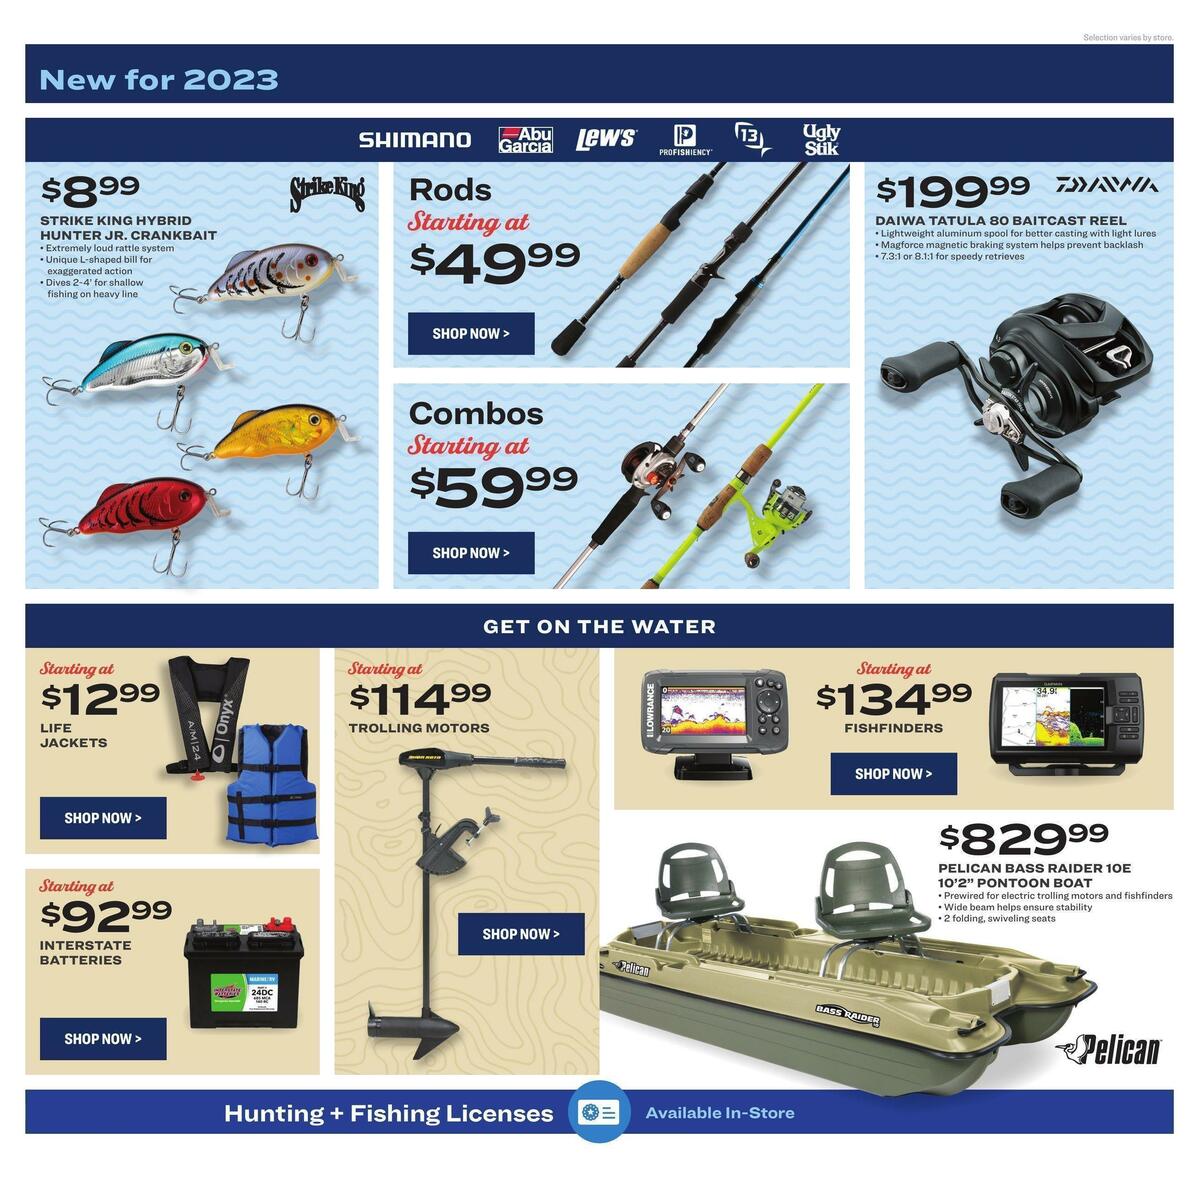 Academy Sports + Outdoors Weekly Ad from January 17